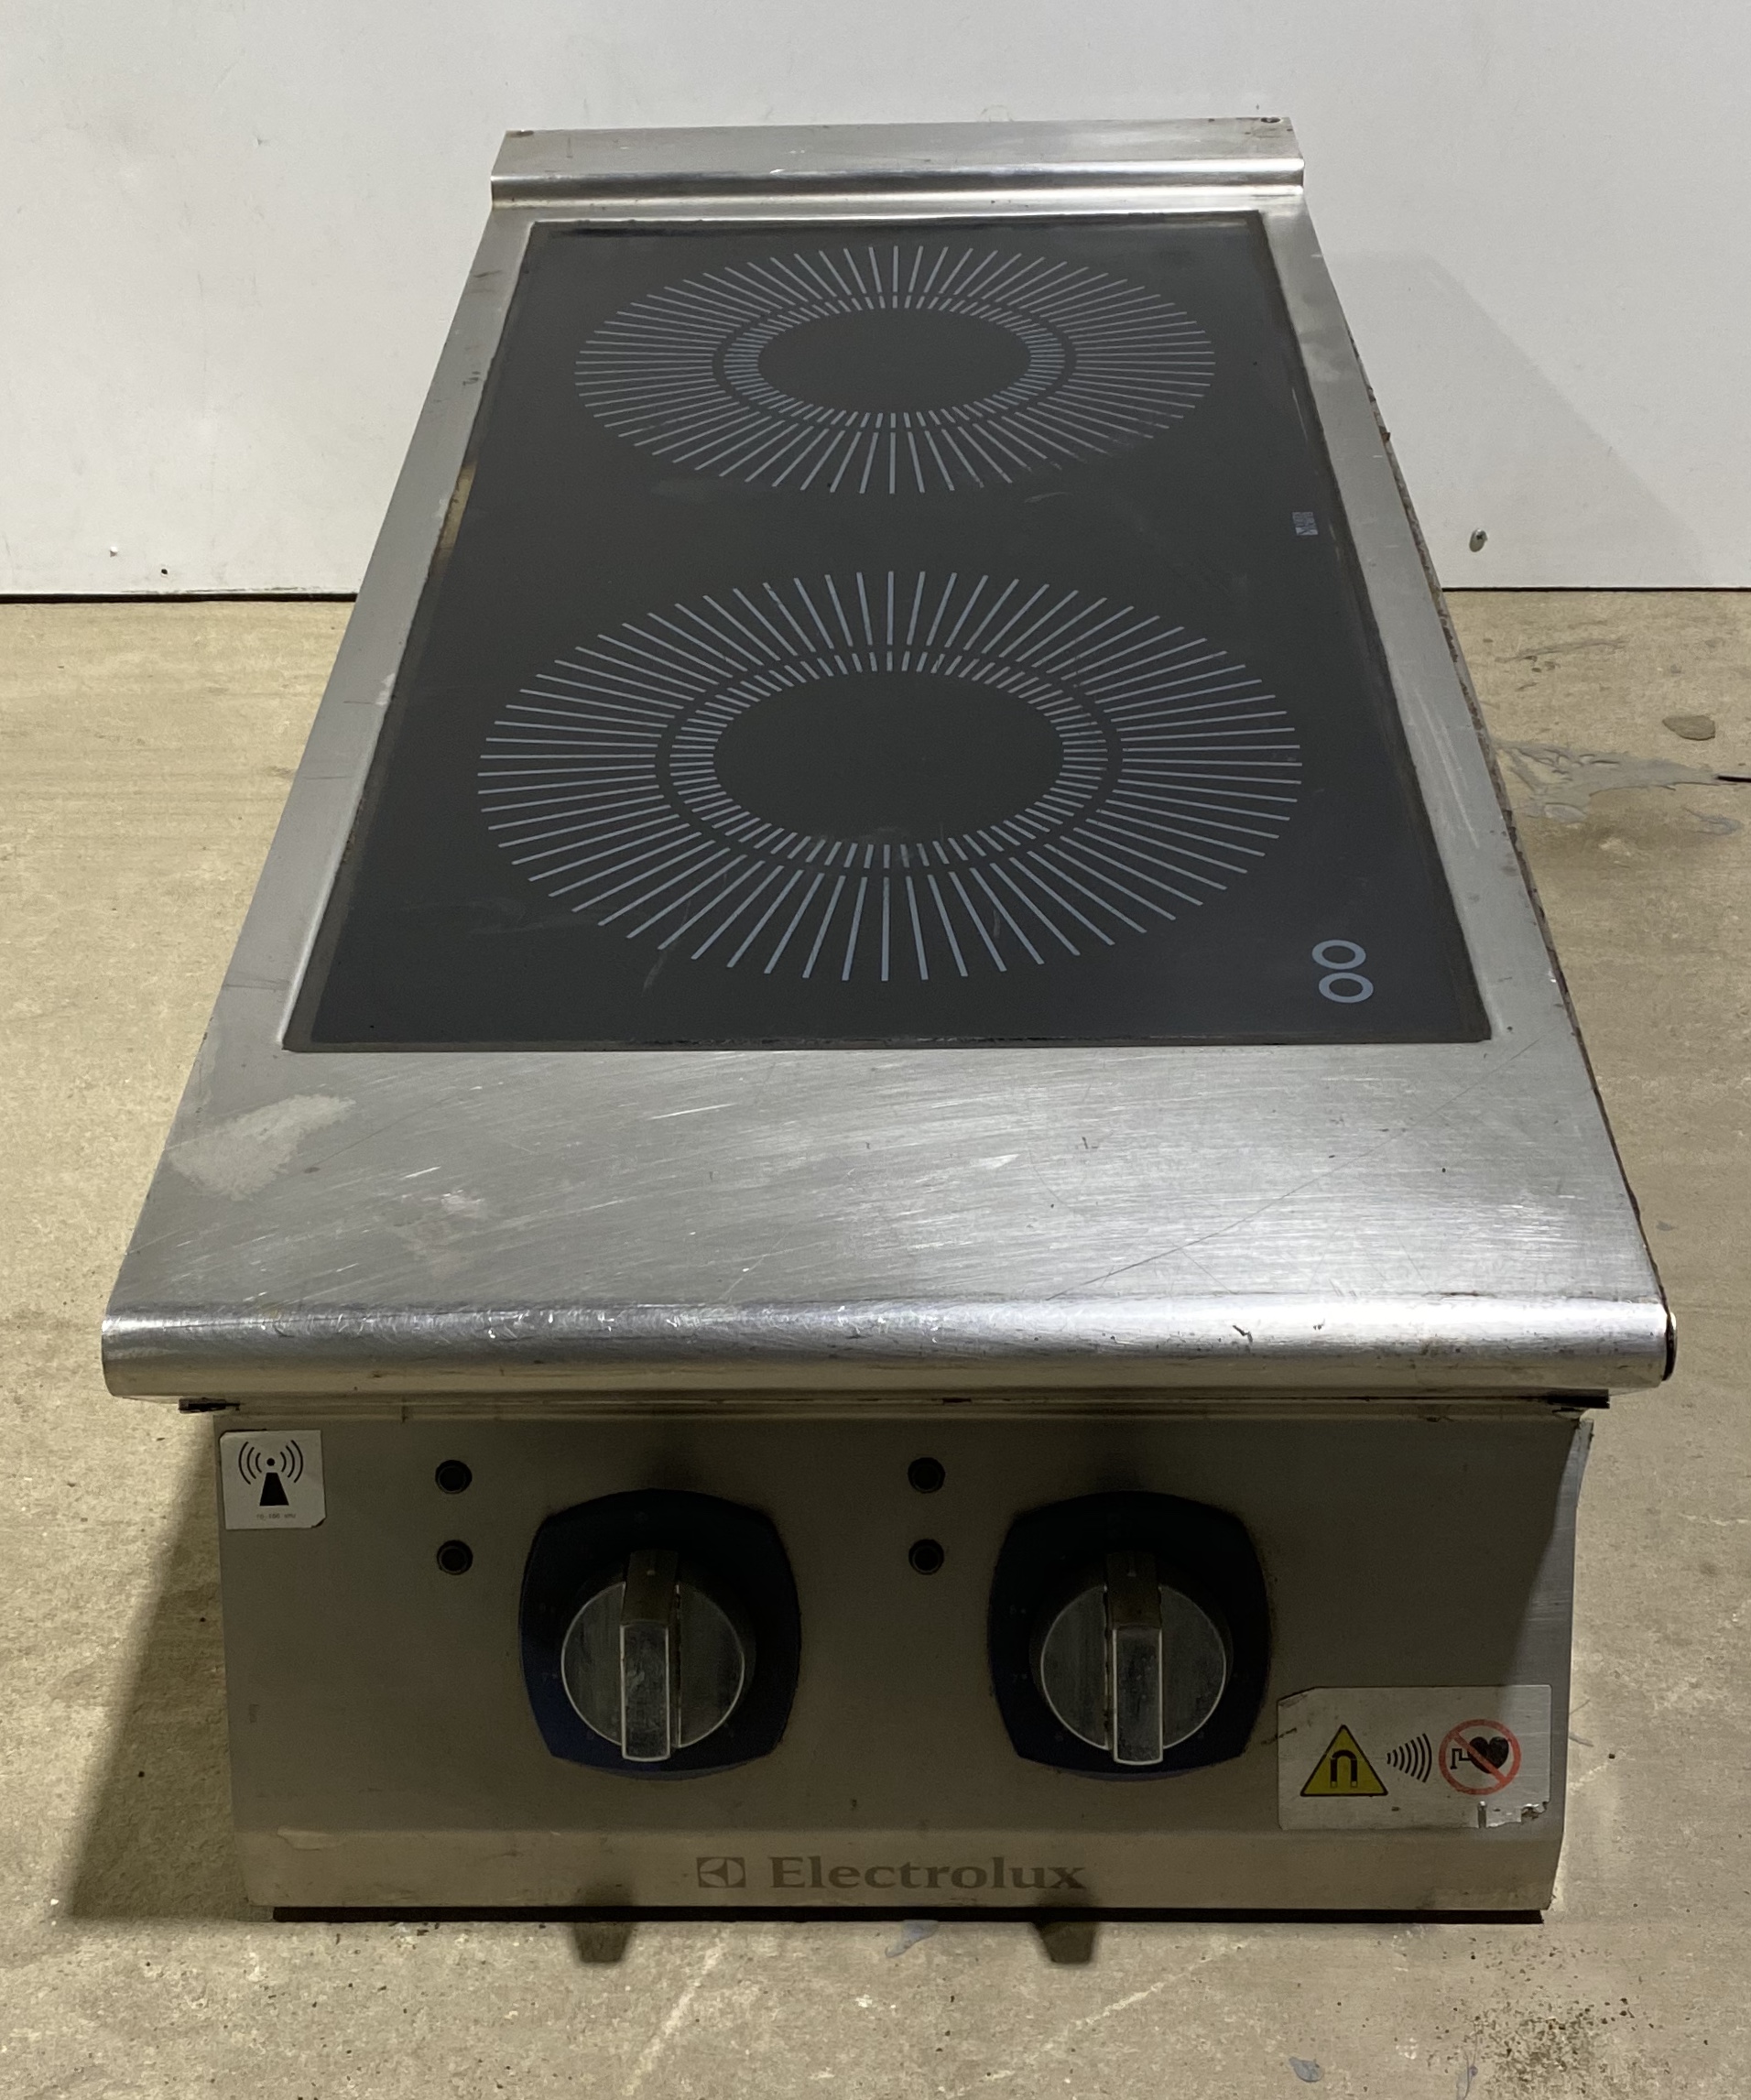 Electrolux E9INED2008 – 3 phase Double Induction